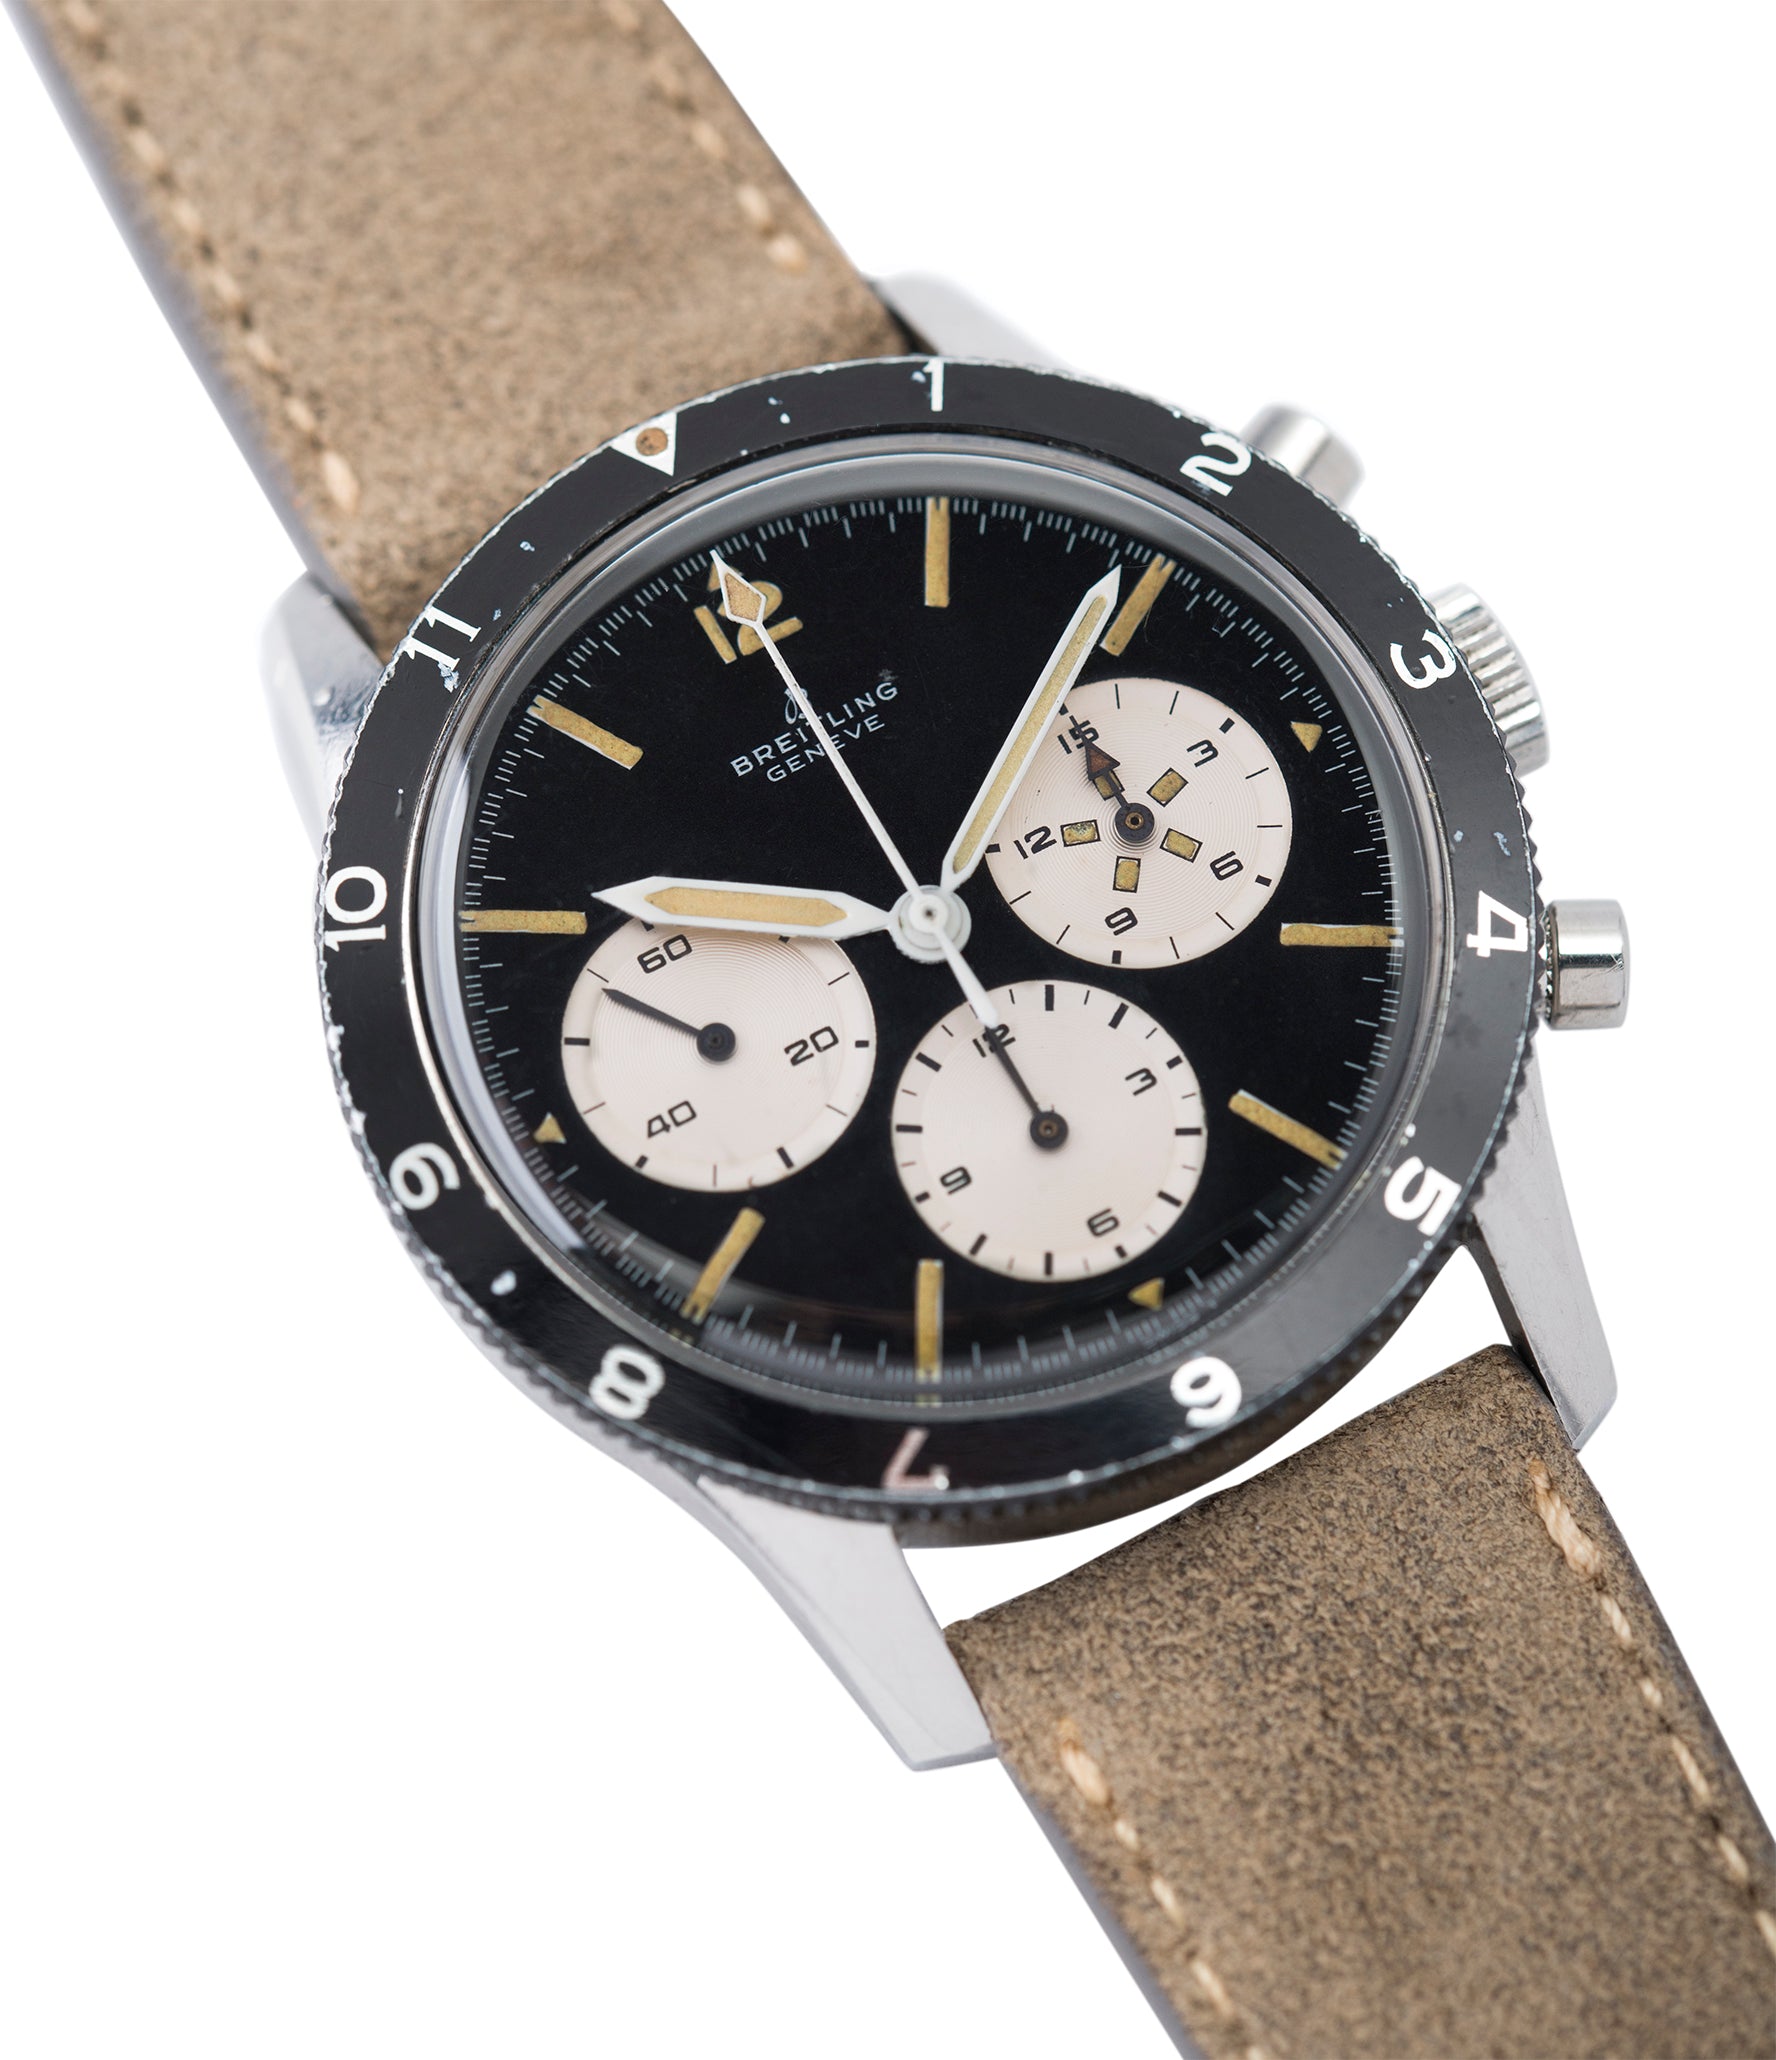 Buy Breitling AVI 765 watch | Buy vintage Breitling watches online – A ...